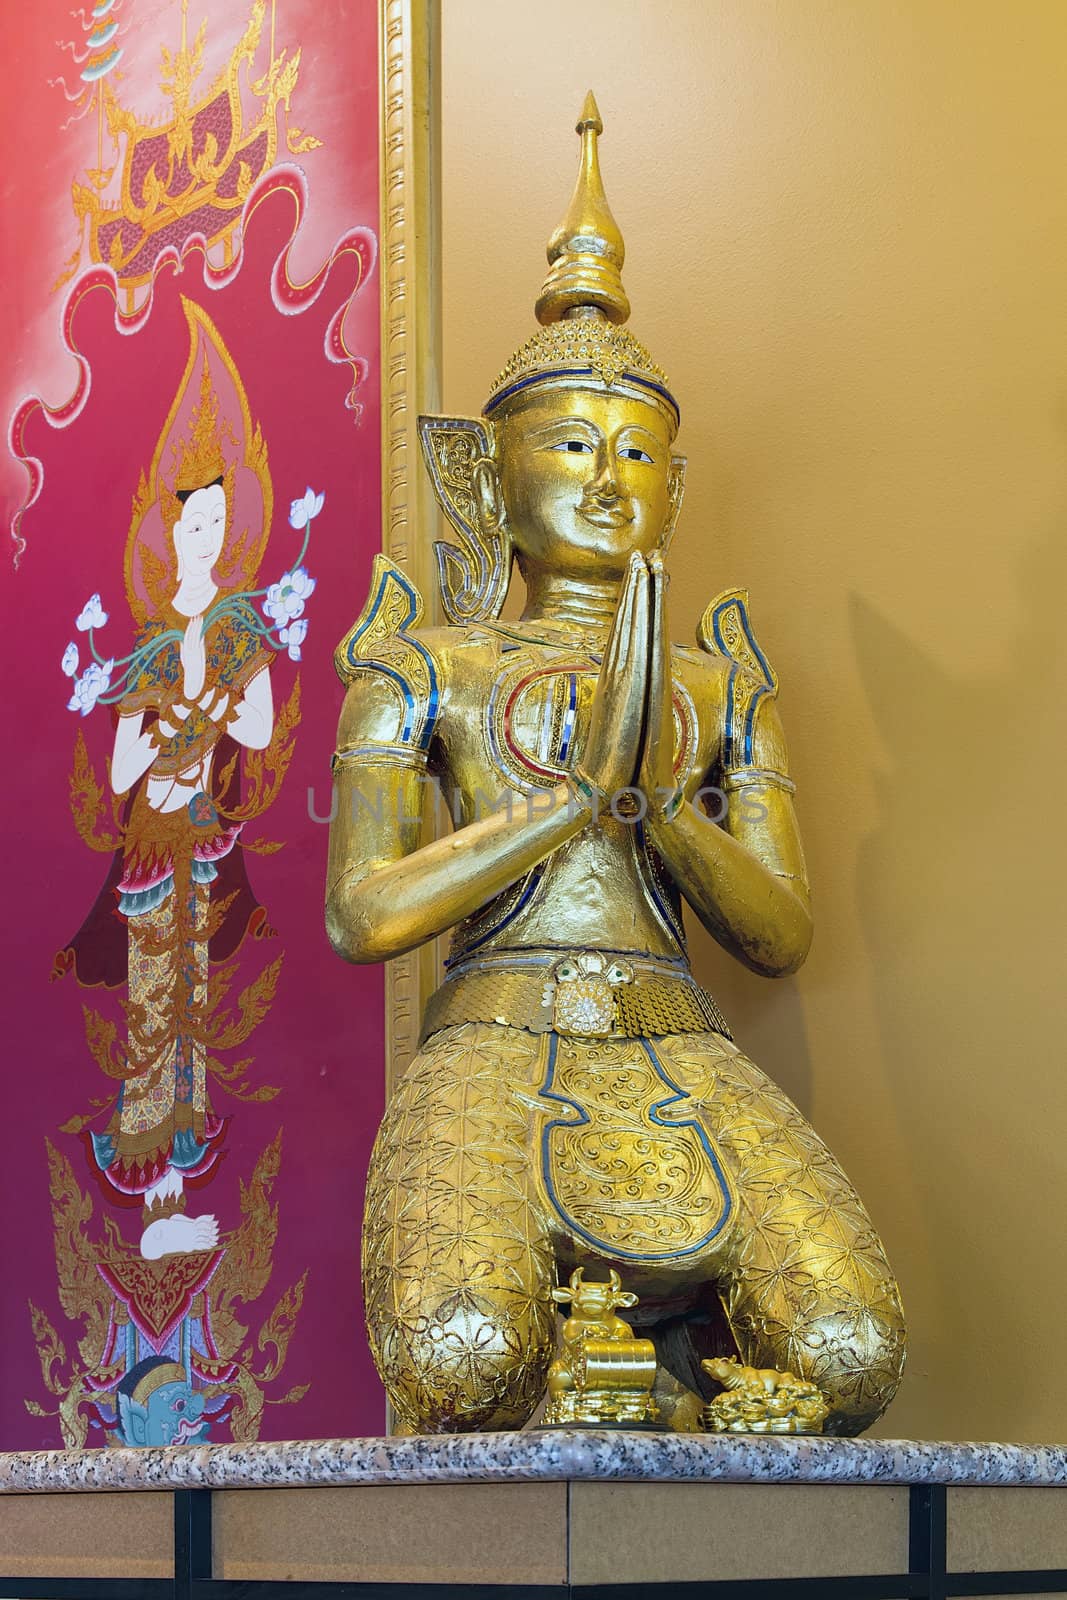 Thai Teppanom Angel Statue and Goddess Painting in Background